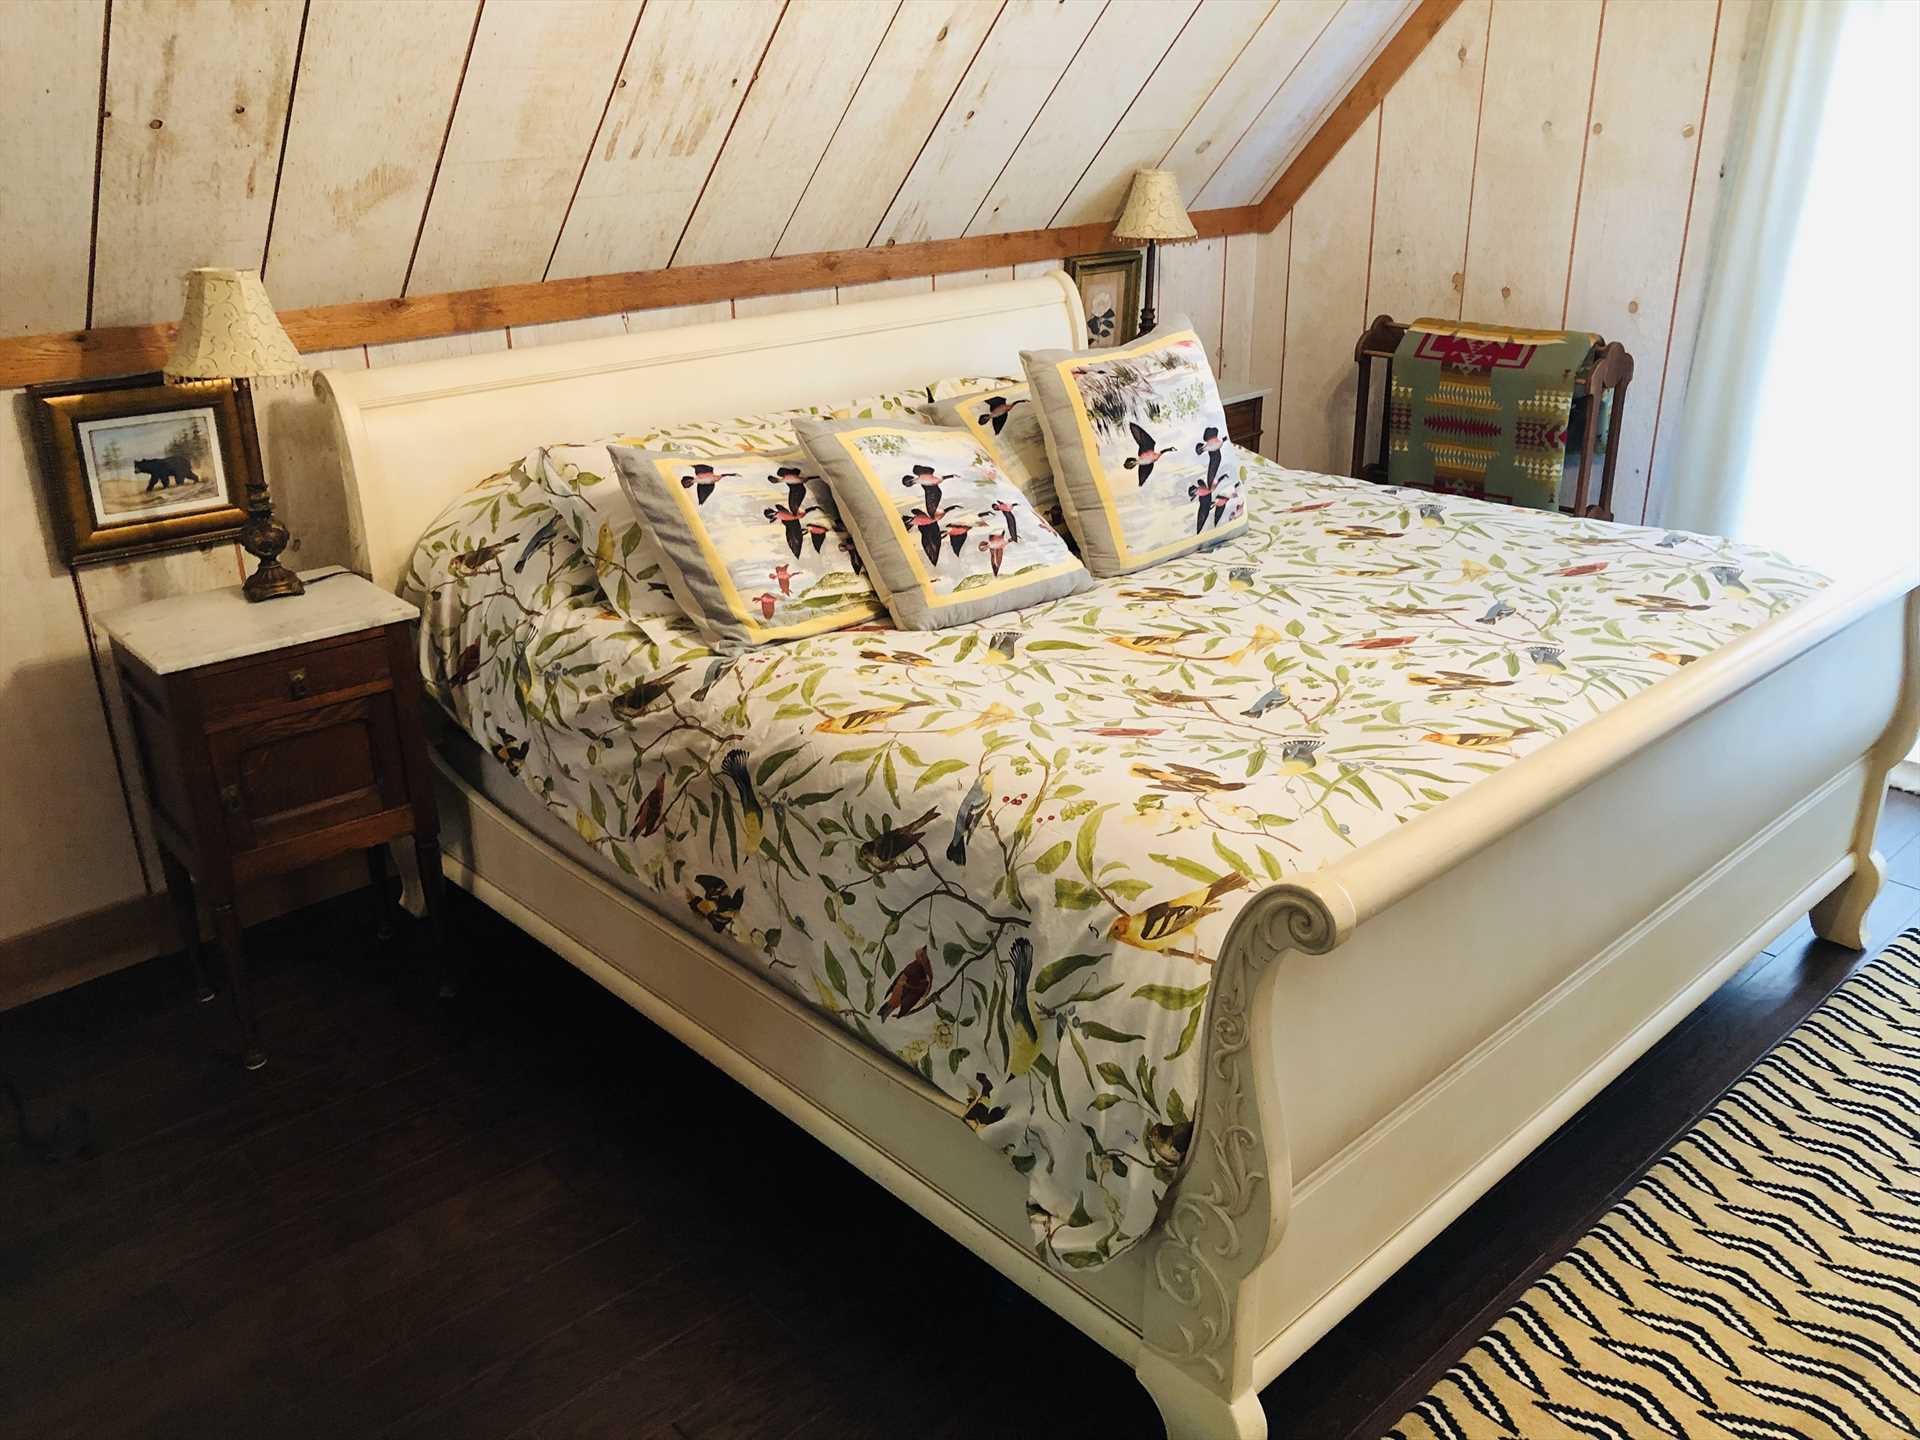                                                 The vintage sleigh-style bed is fully dressed with soft, quality linens and throw pillows.